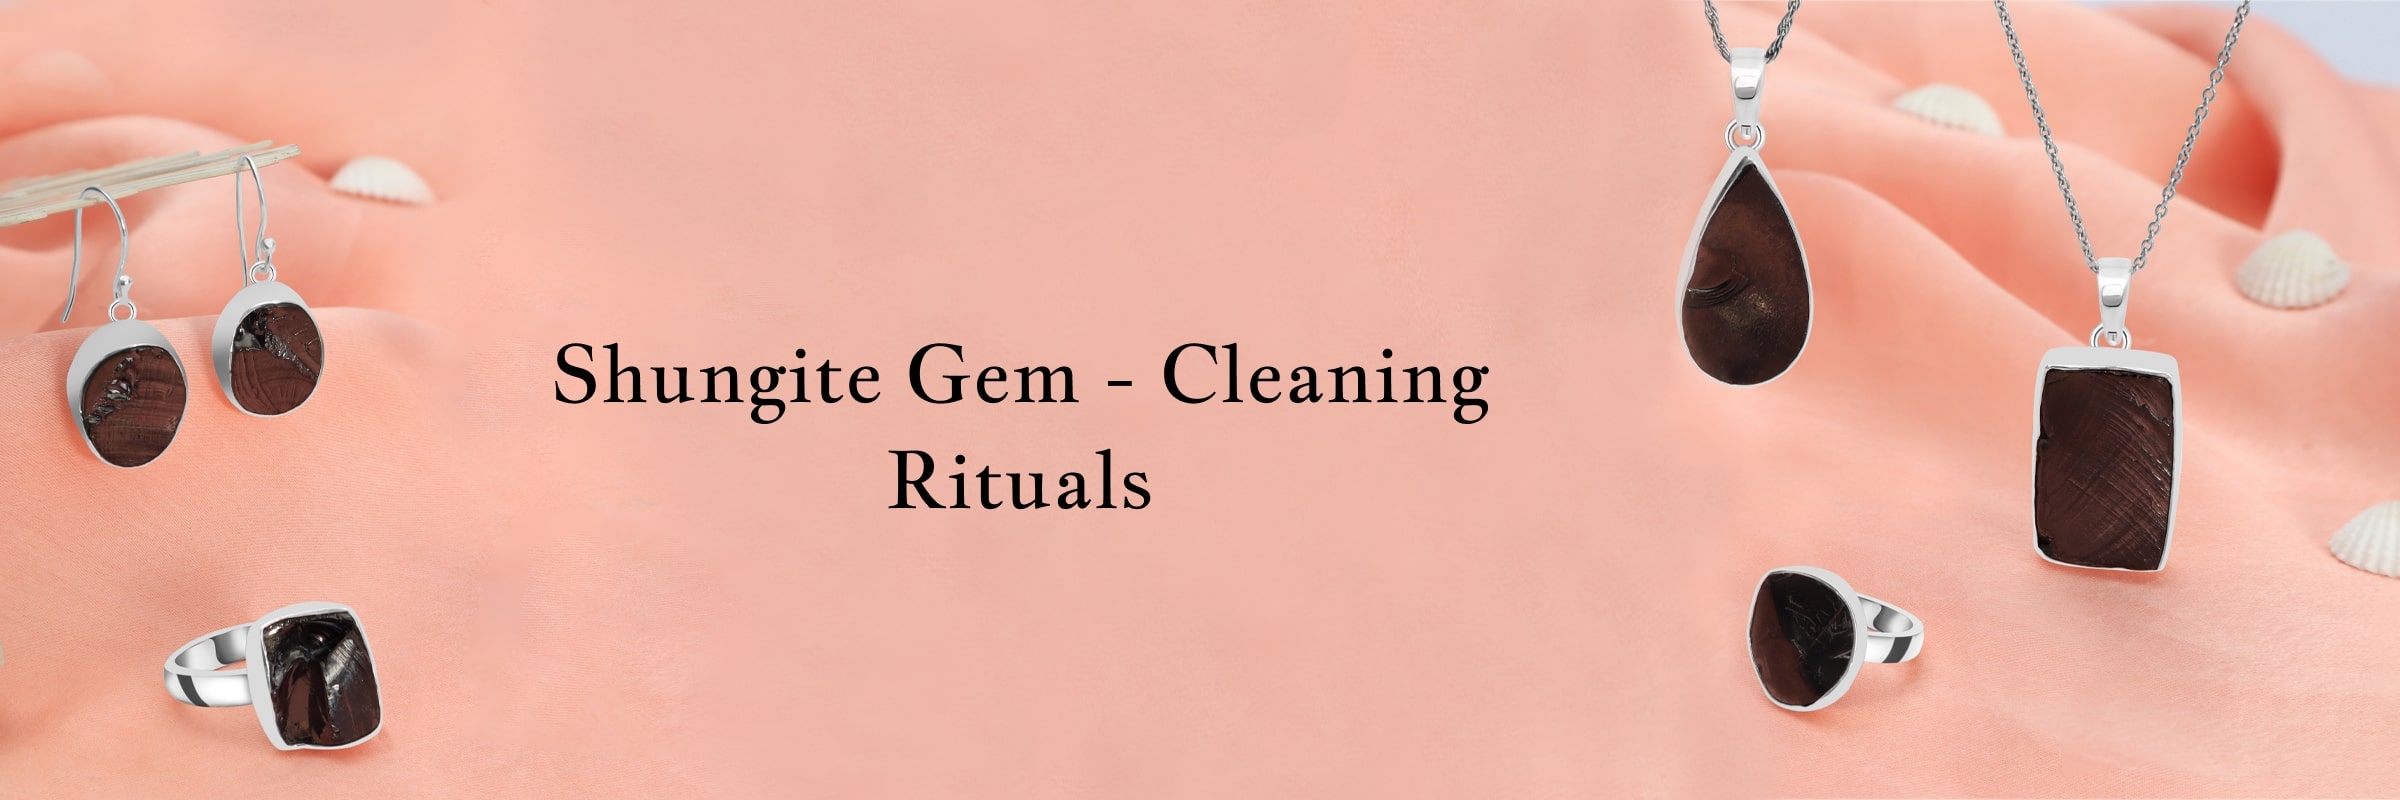 How to Cleanse Your Shungite Gem